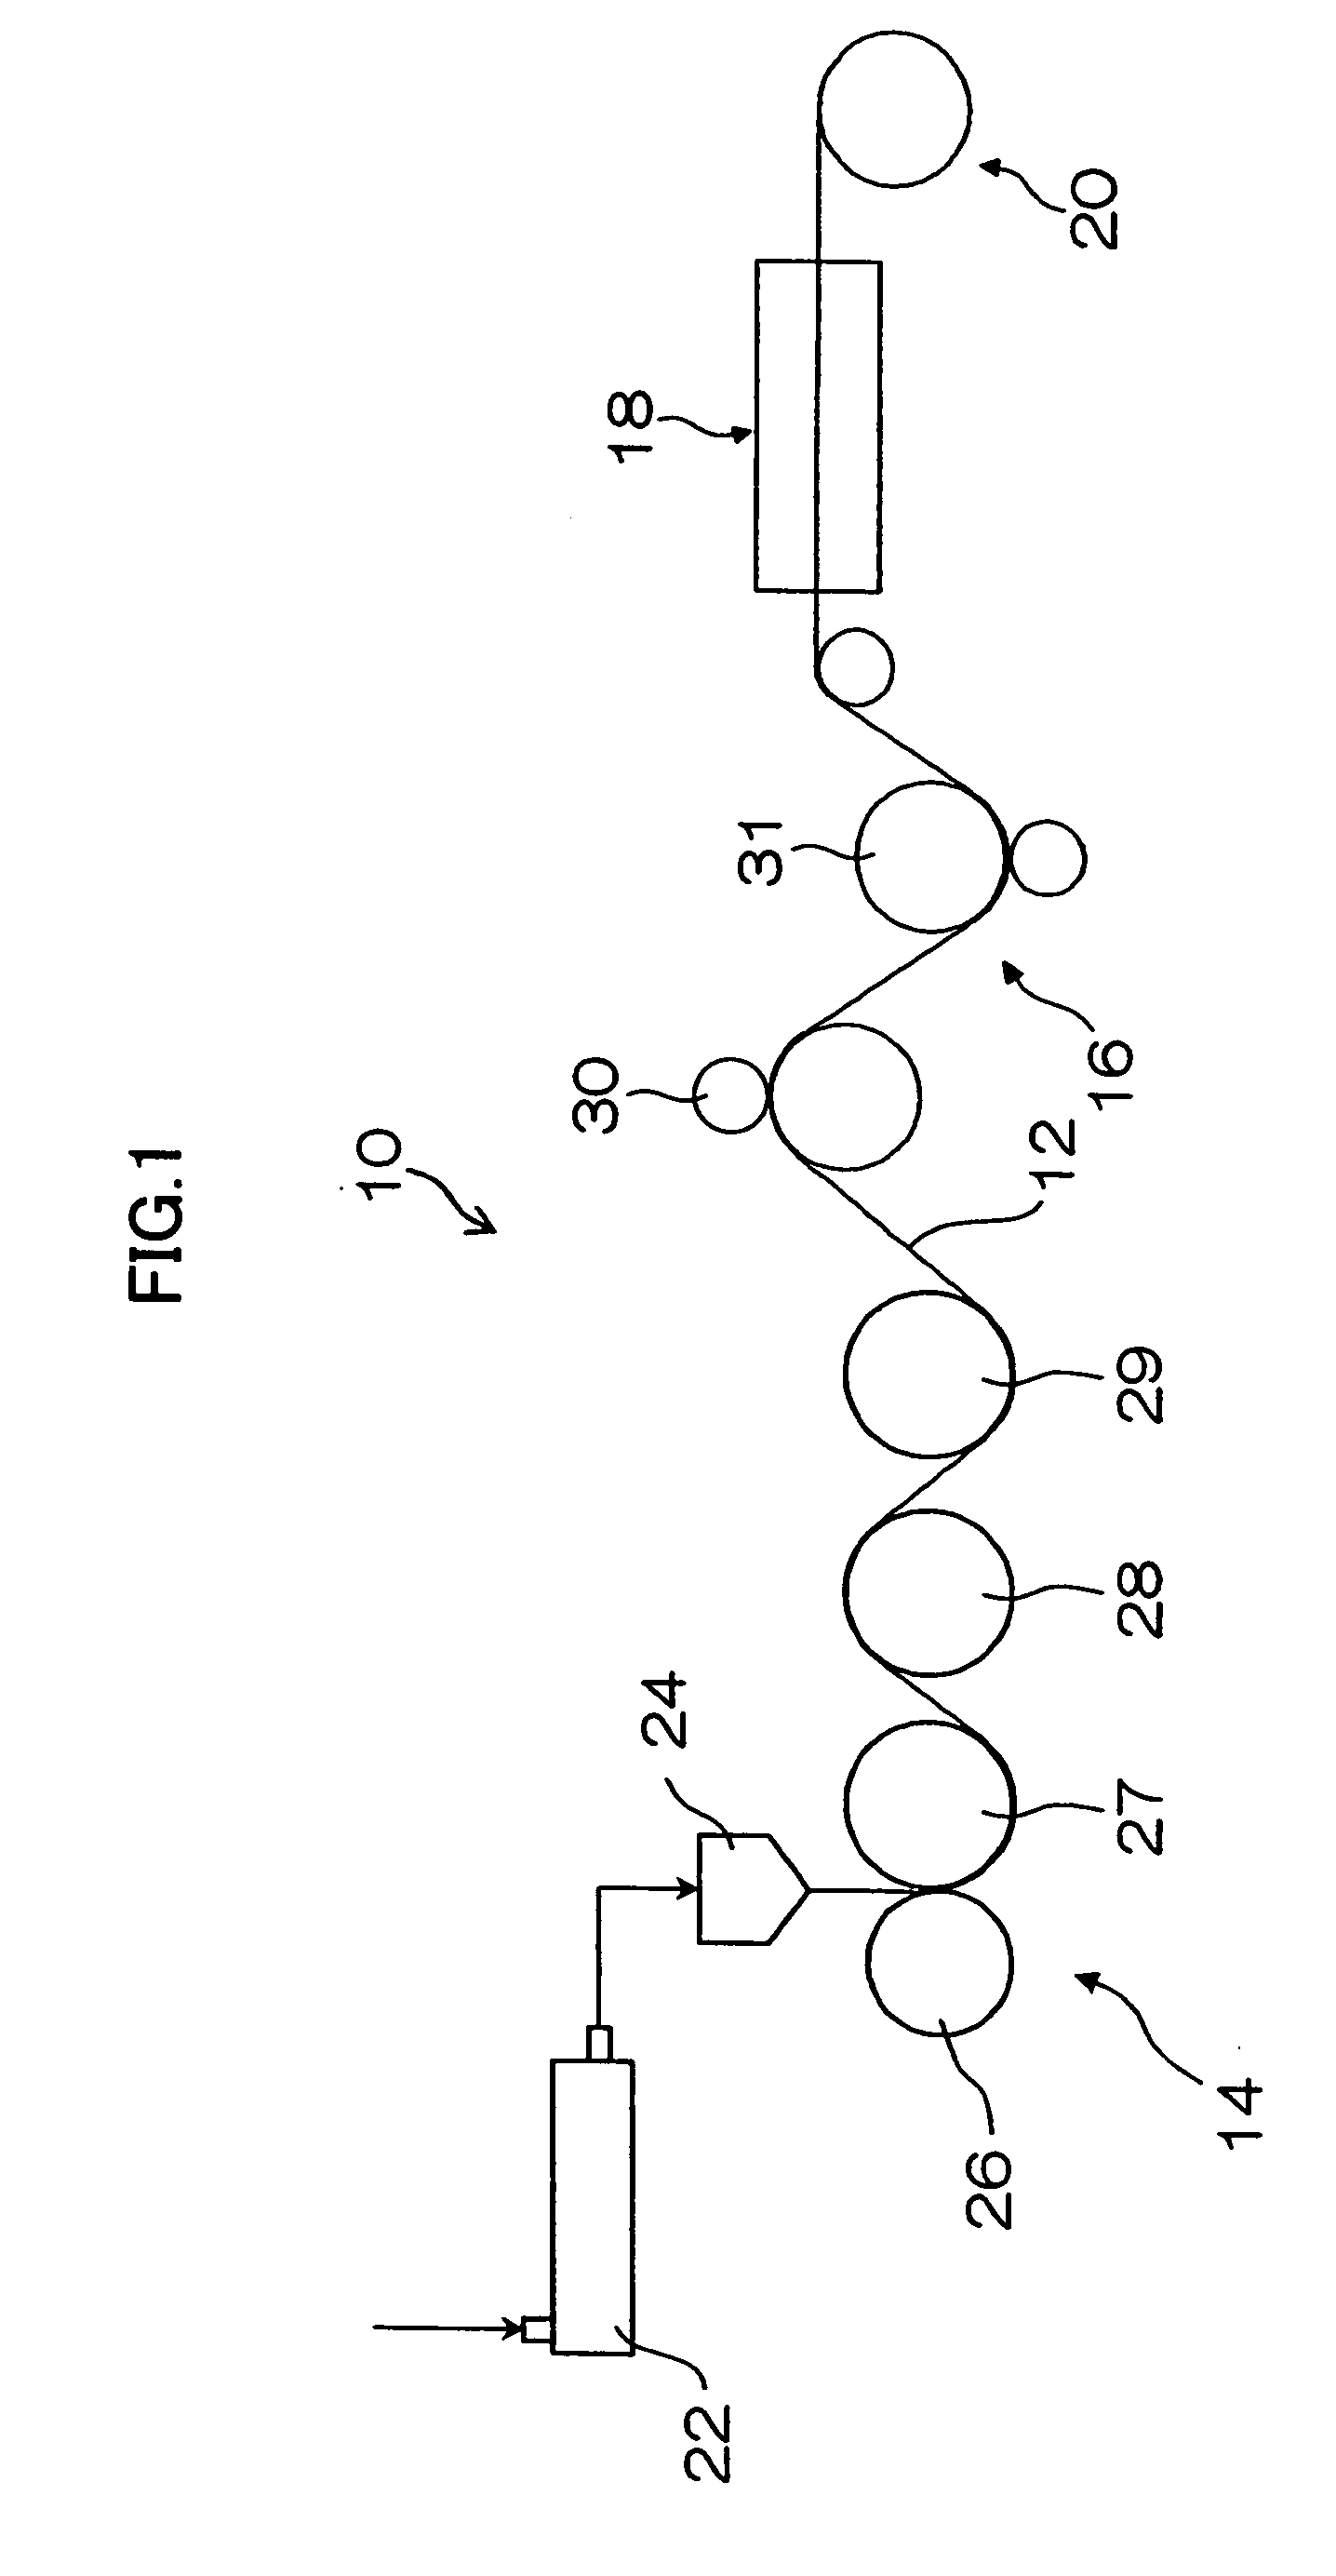 Thermoplastic resin film and method of manufacturing the same